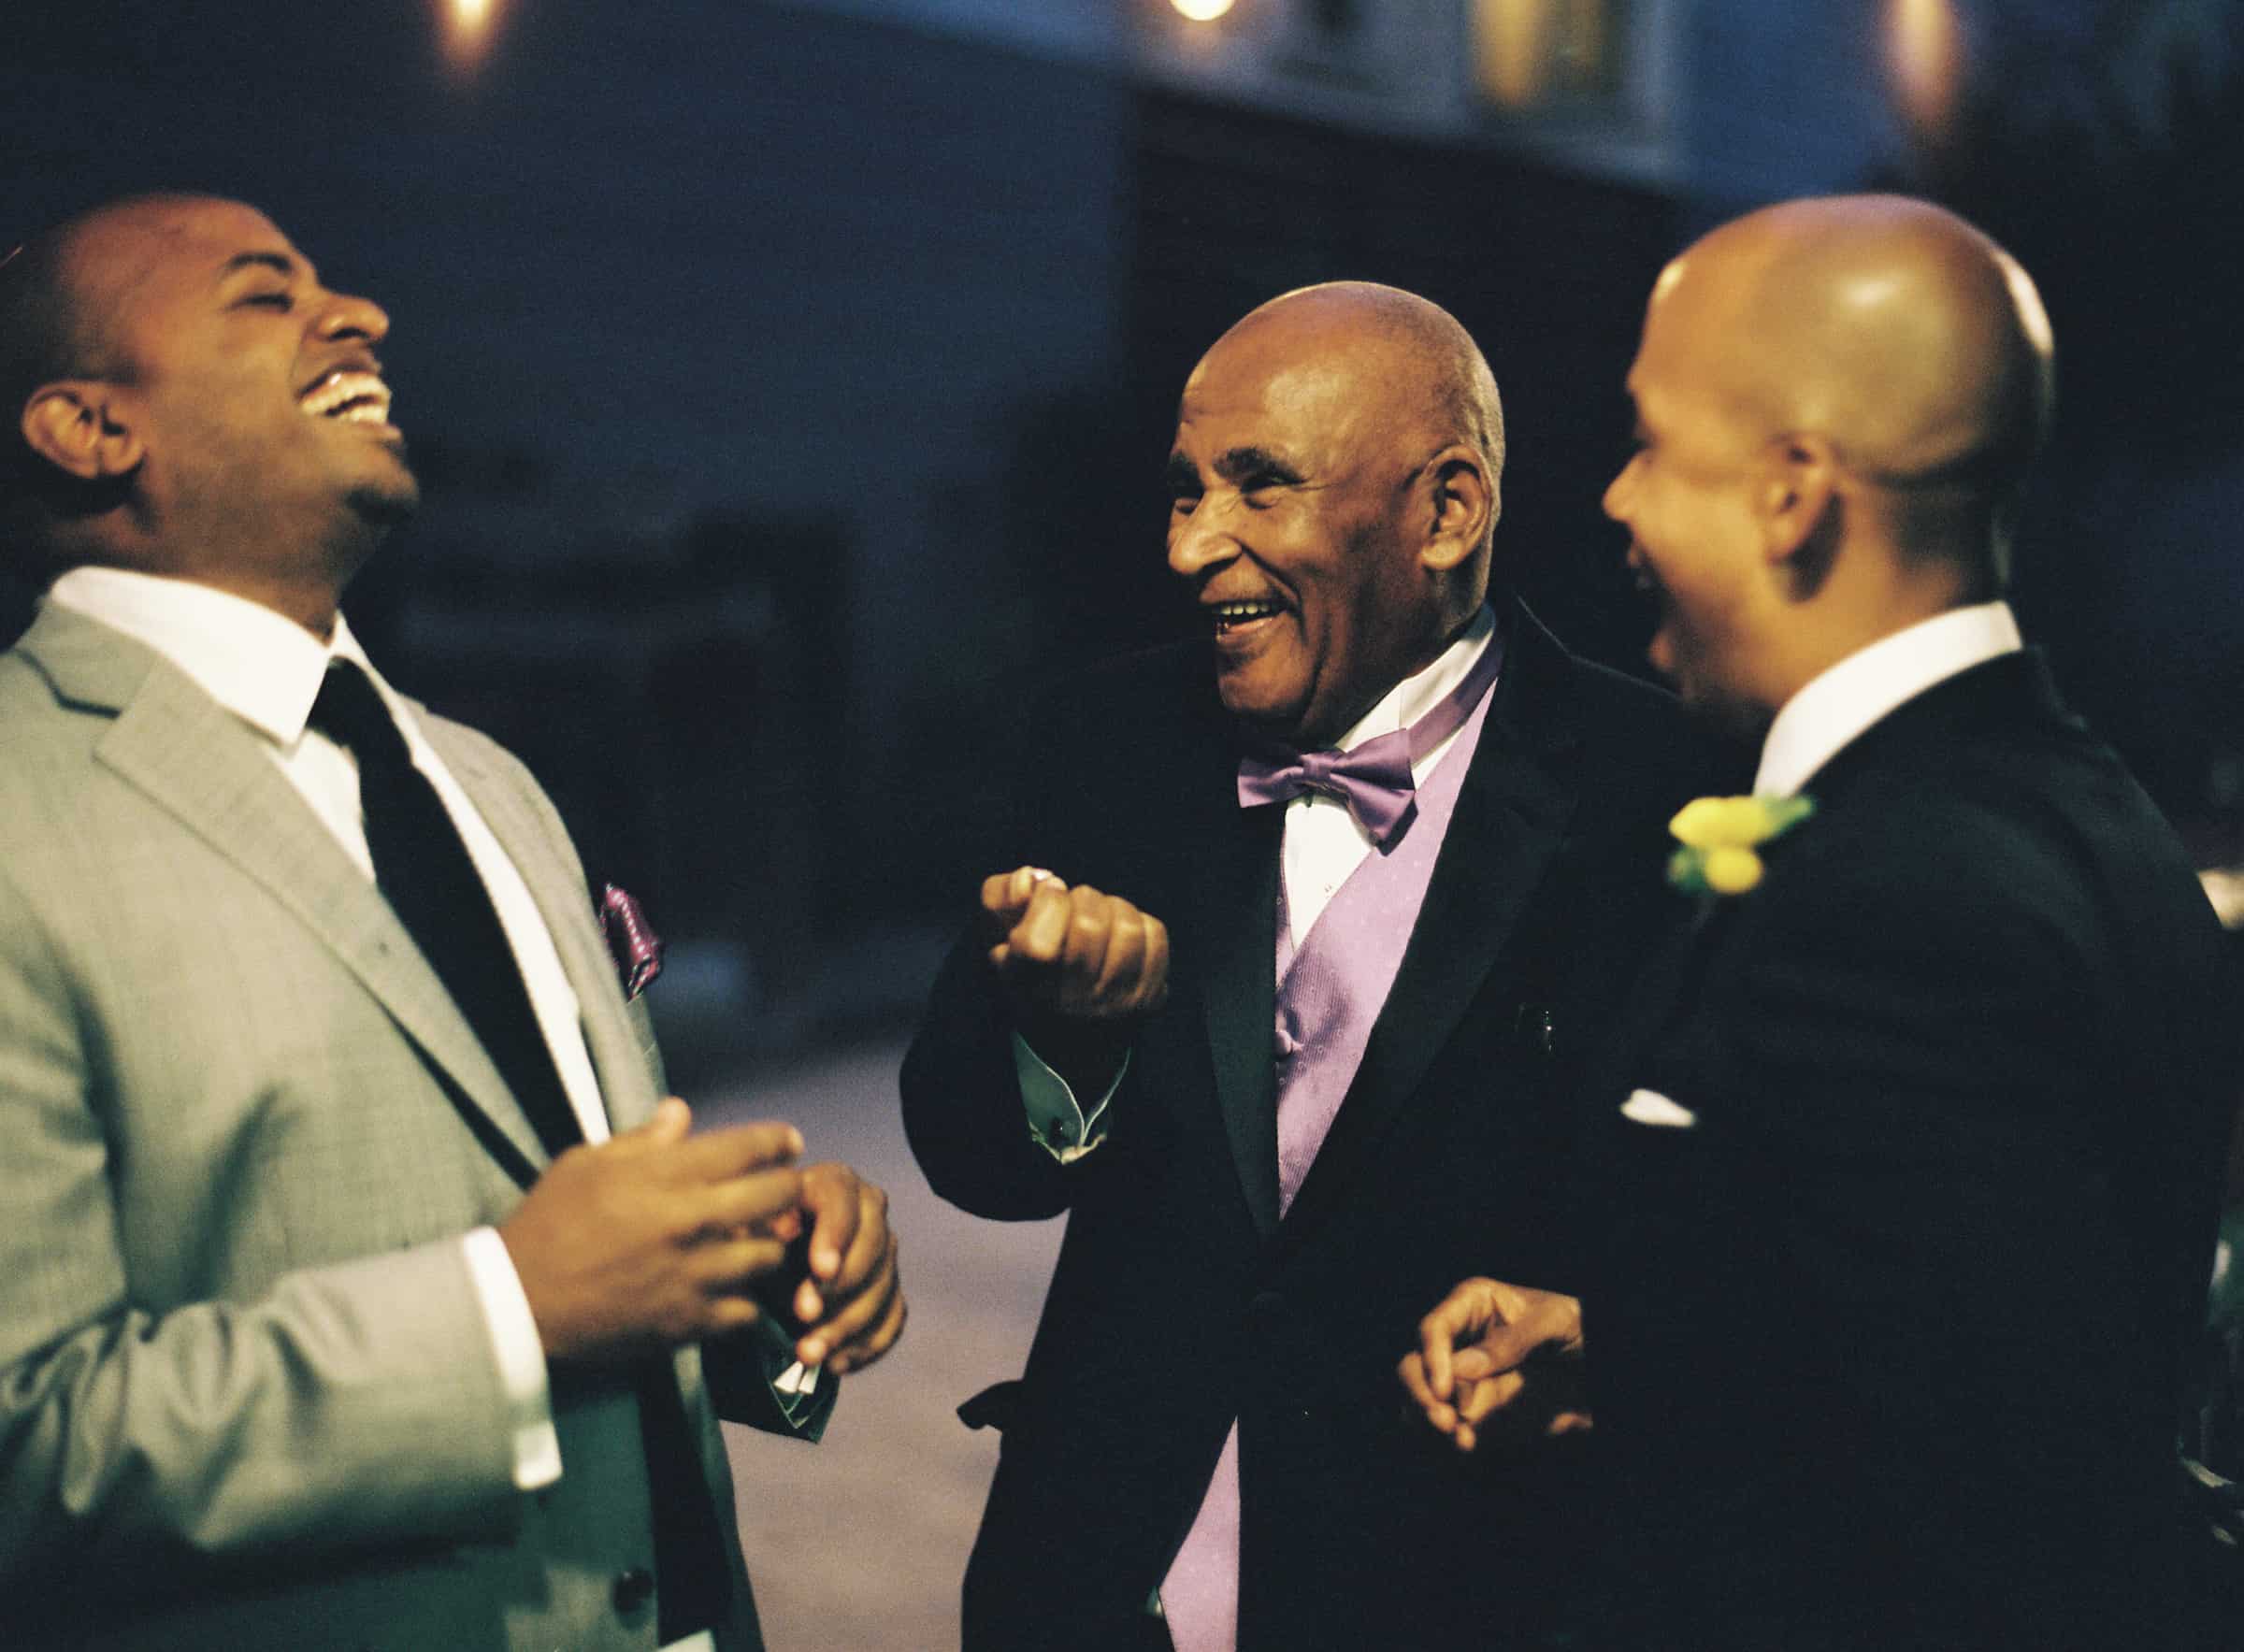 groom laughing with guests at night